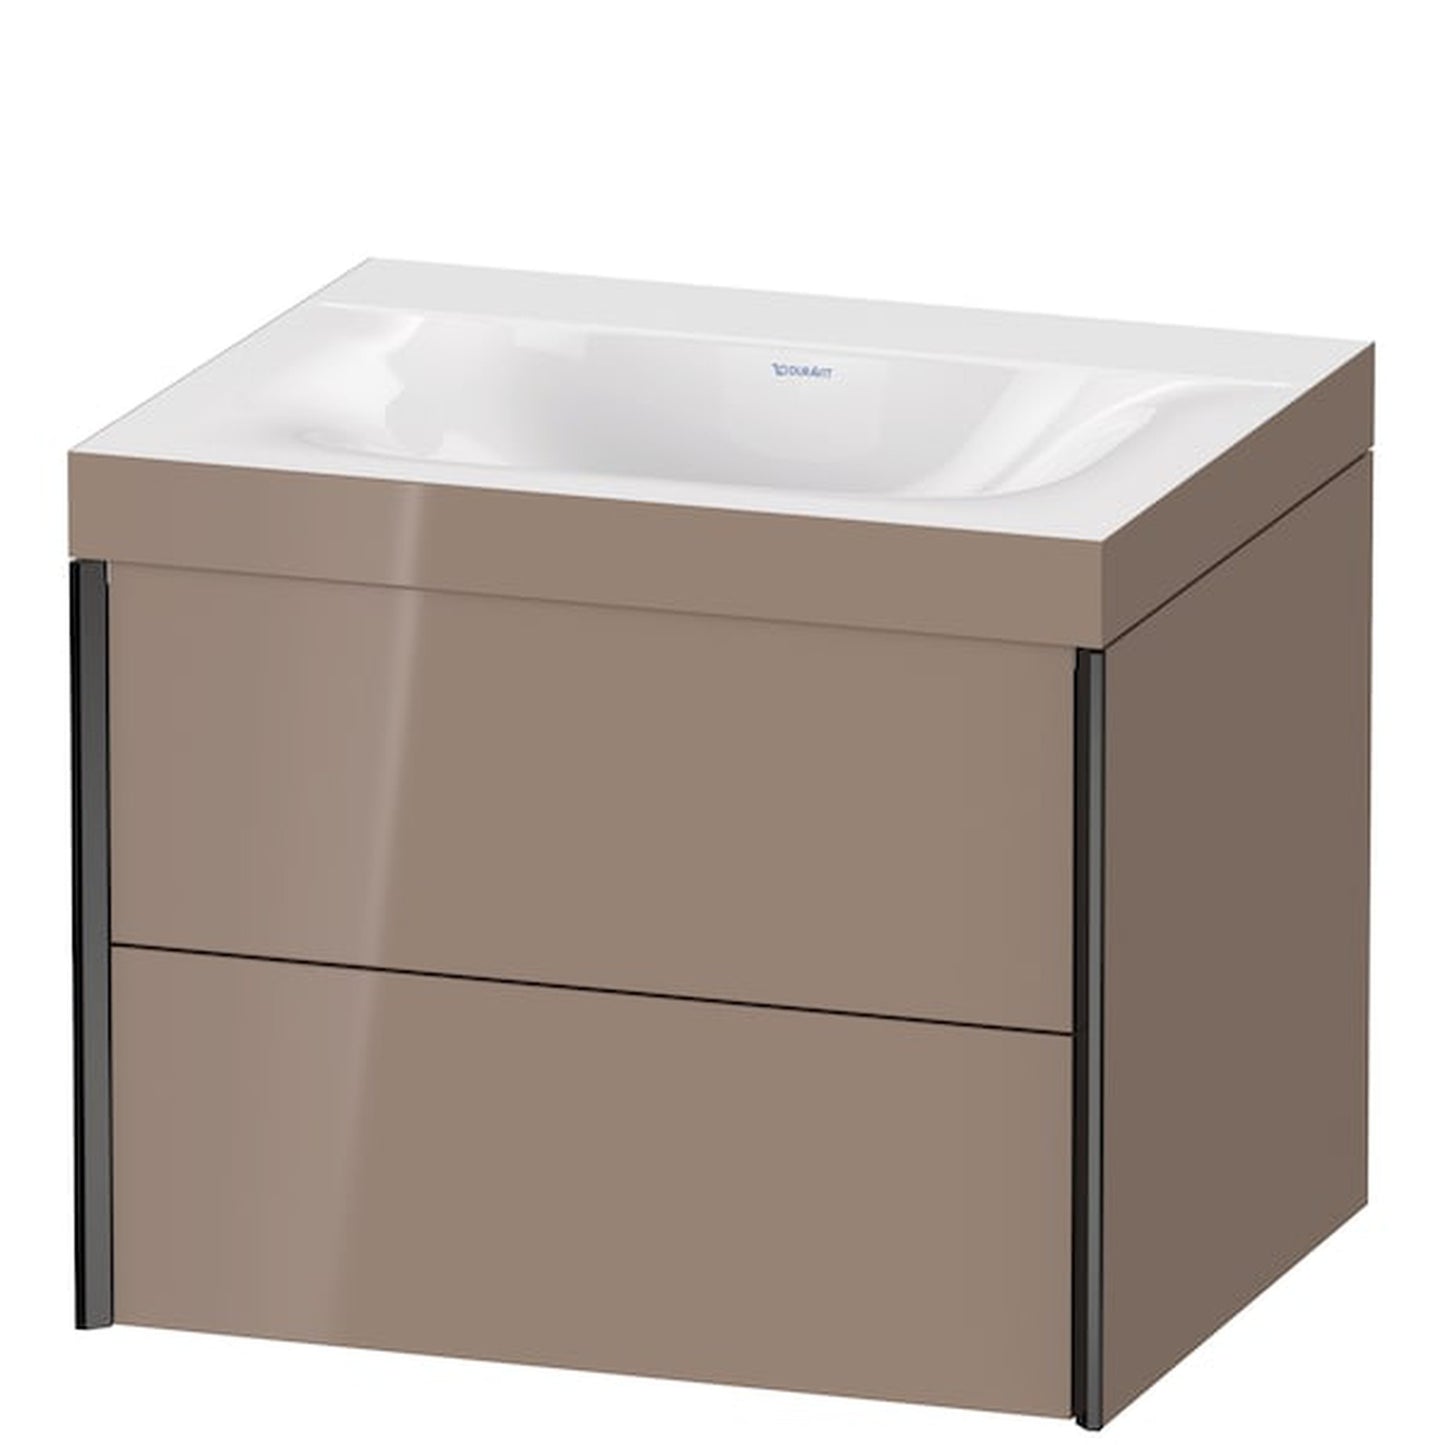 Duravit Xviu 24" x 20" x 19" Two Drawer C-Bonded Wall-Mount Vanity Kit Without Tap Hole, Cappuccino (XV4614NB286C)